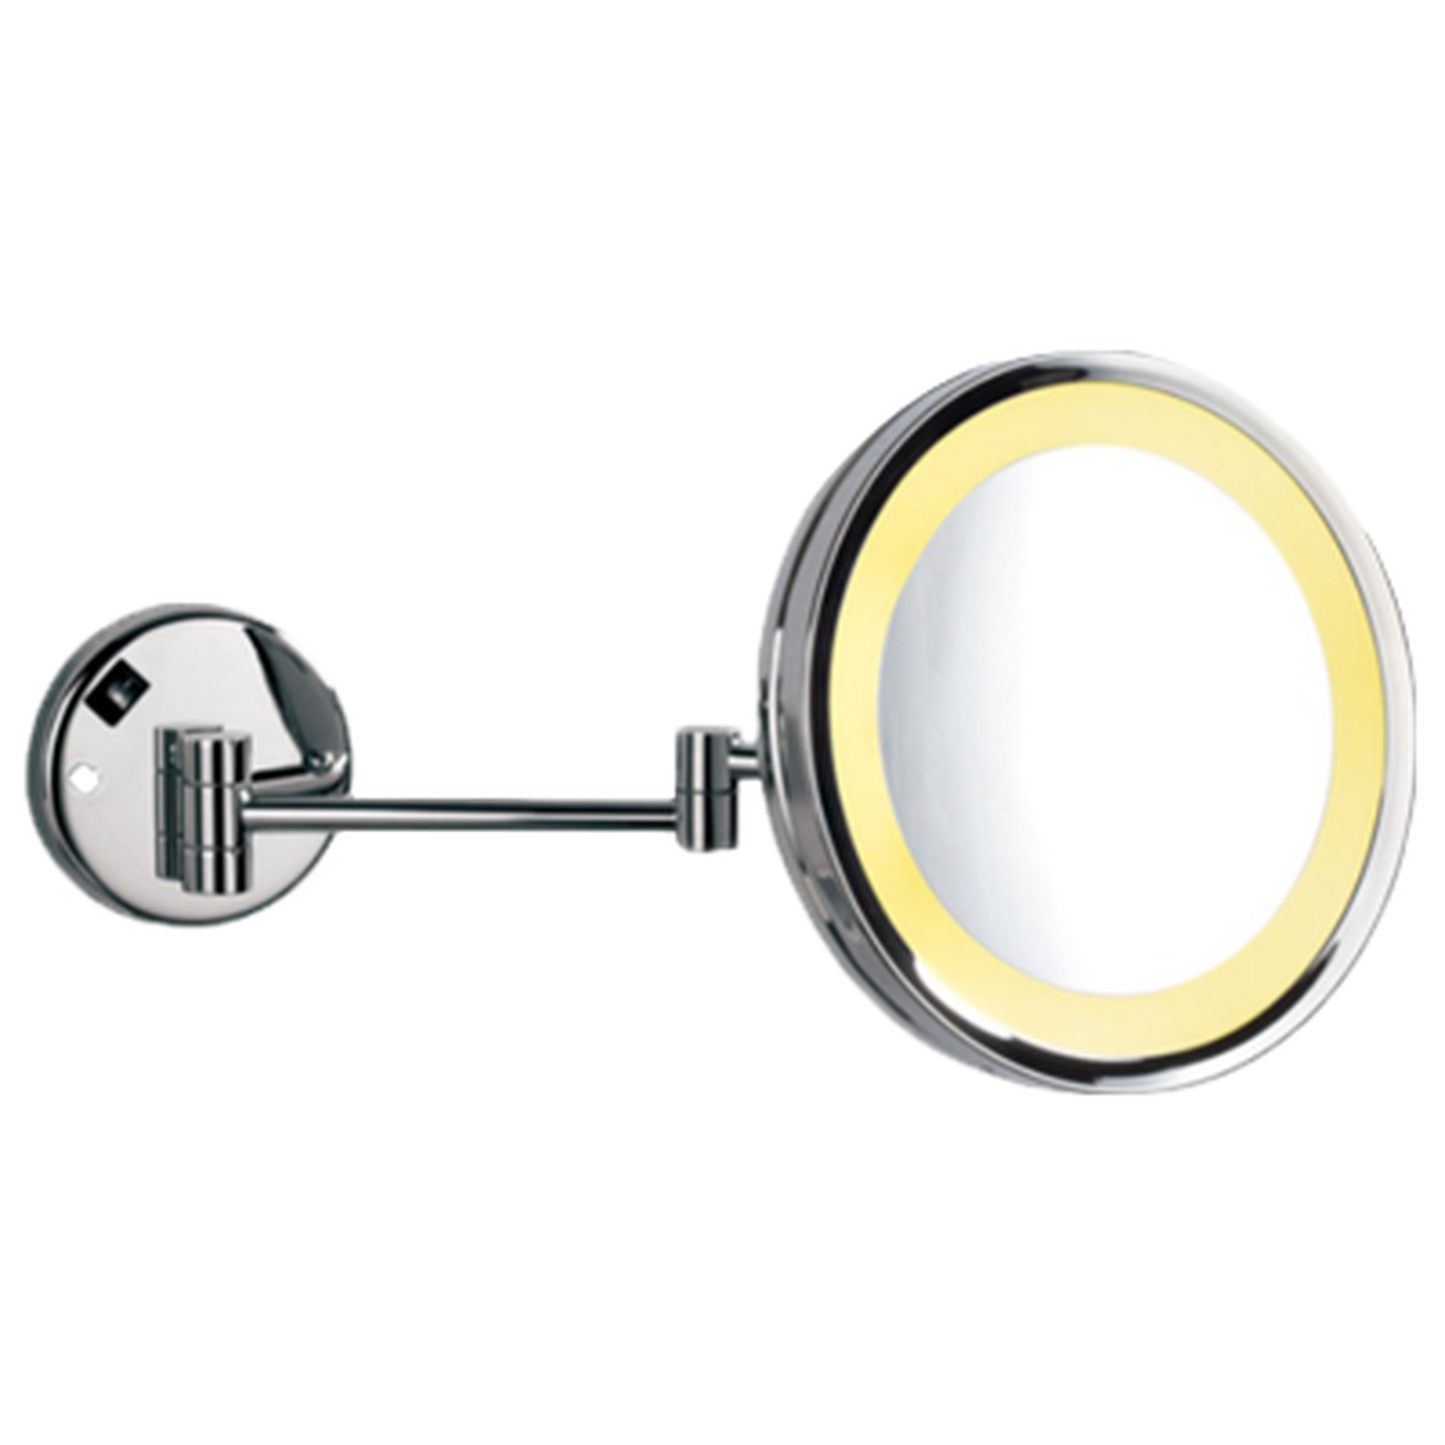 Afina 10" Polished Chrome 5X Magnification Round Lighted Wall Mount Makeup Mirror